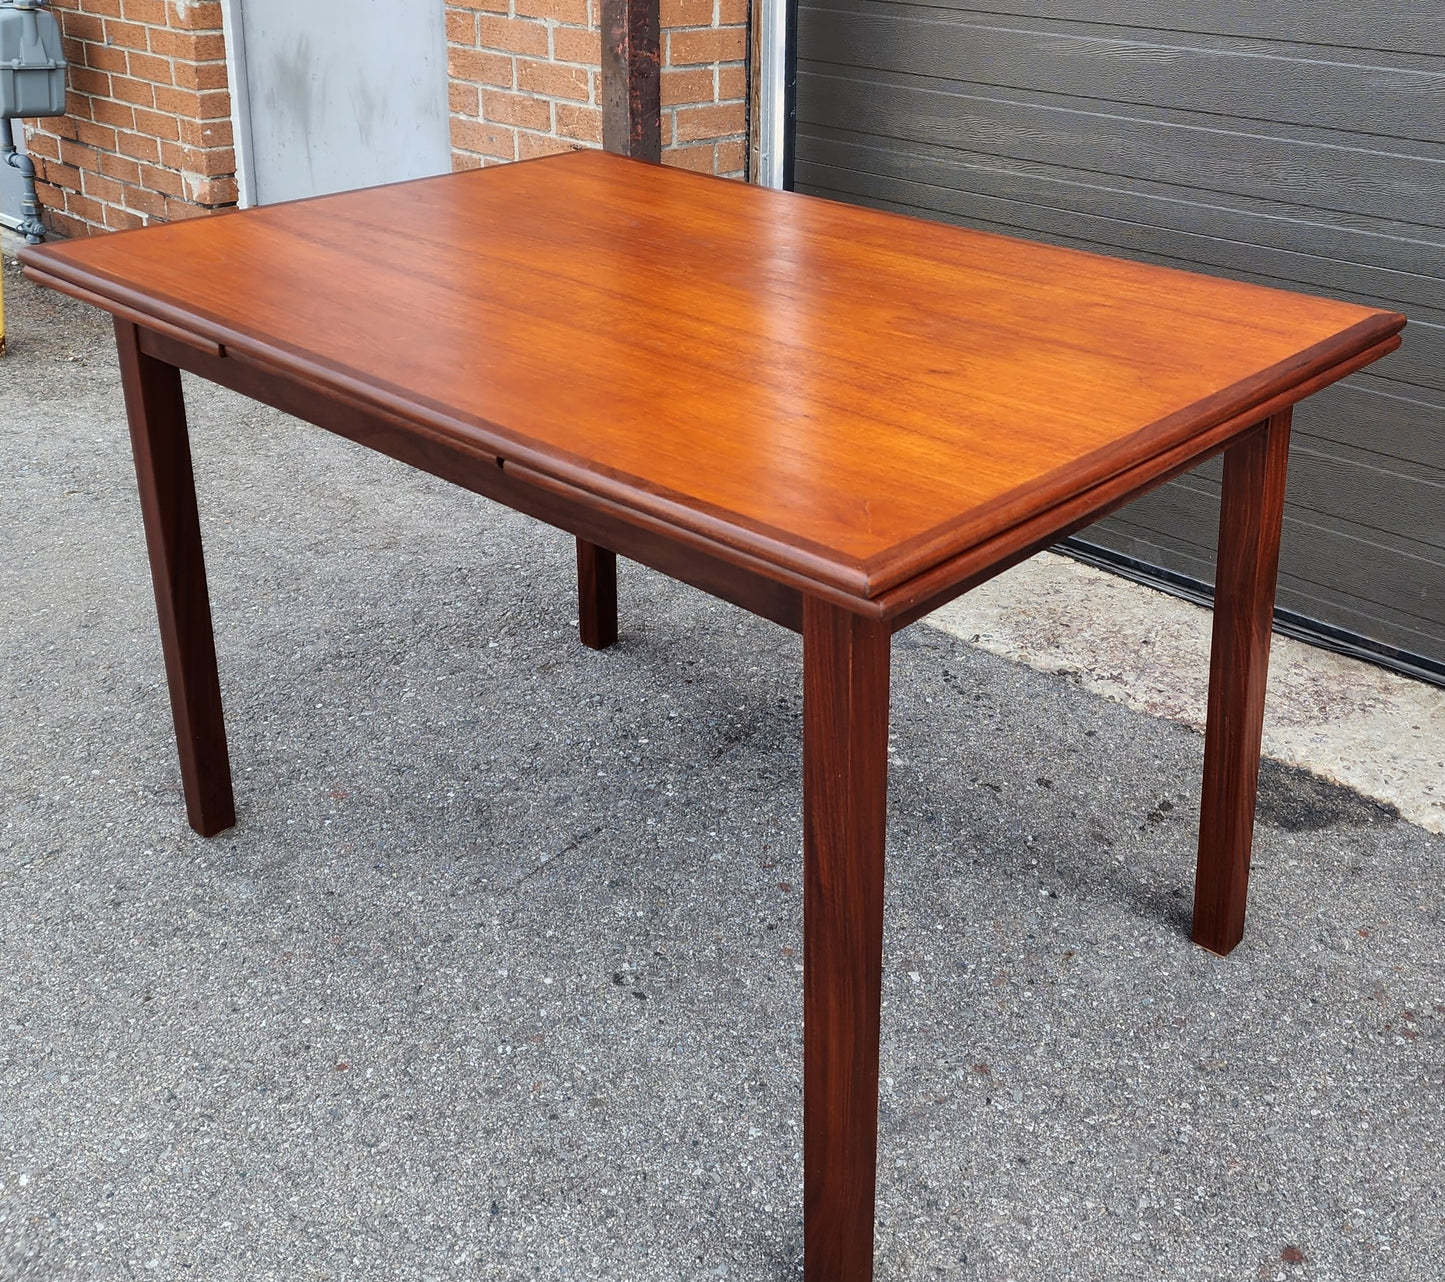 REFINISHED Mid Century Modern Teak Extension Dining Table or Desk 51"-86" by RS Associates